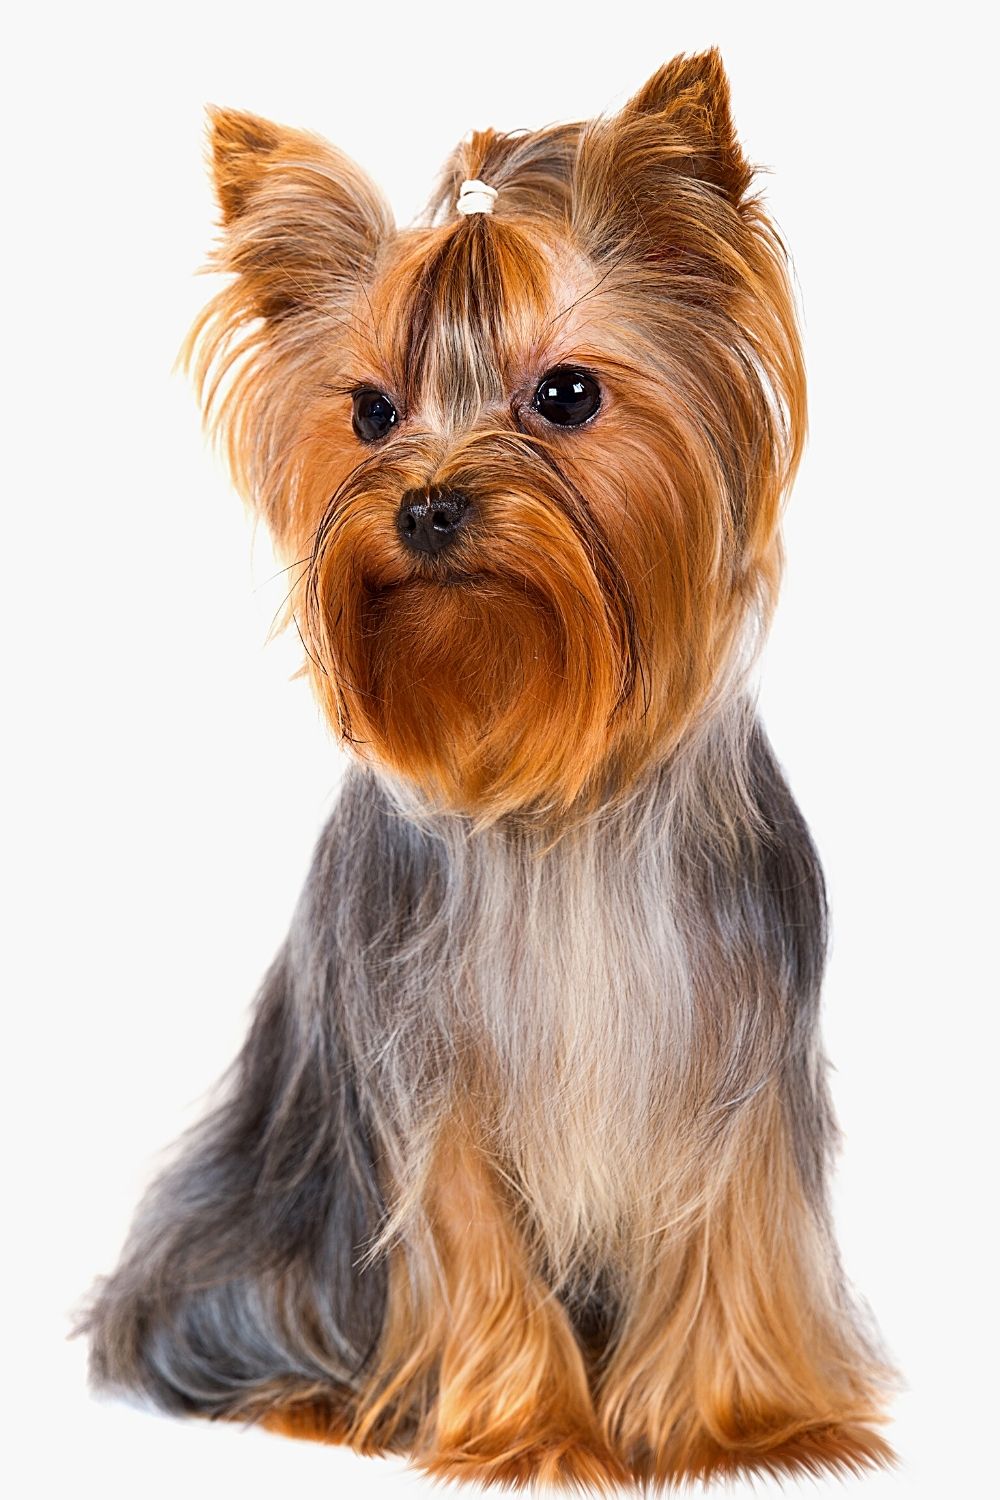 The Yorkshire Terrier, like the rest of the dog breeds that look like the Ewoks, is another close look-alike